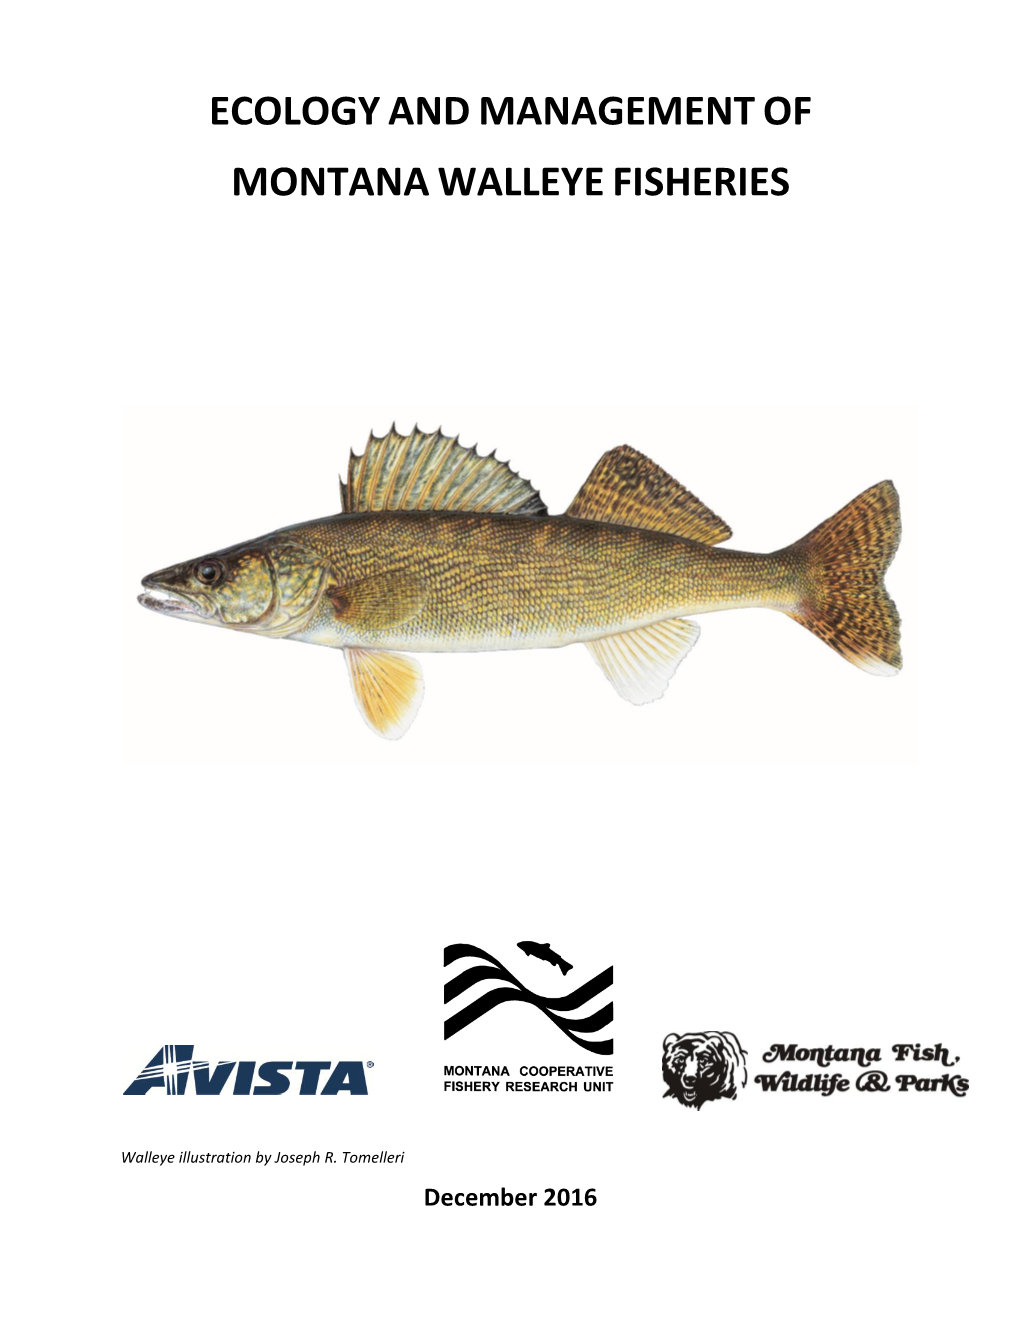 Ecology and Management of Montana Walleye Fisheries